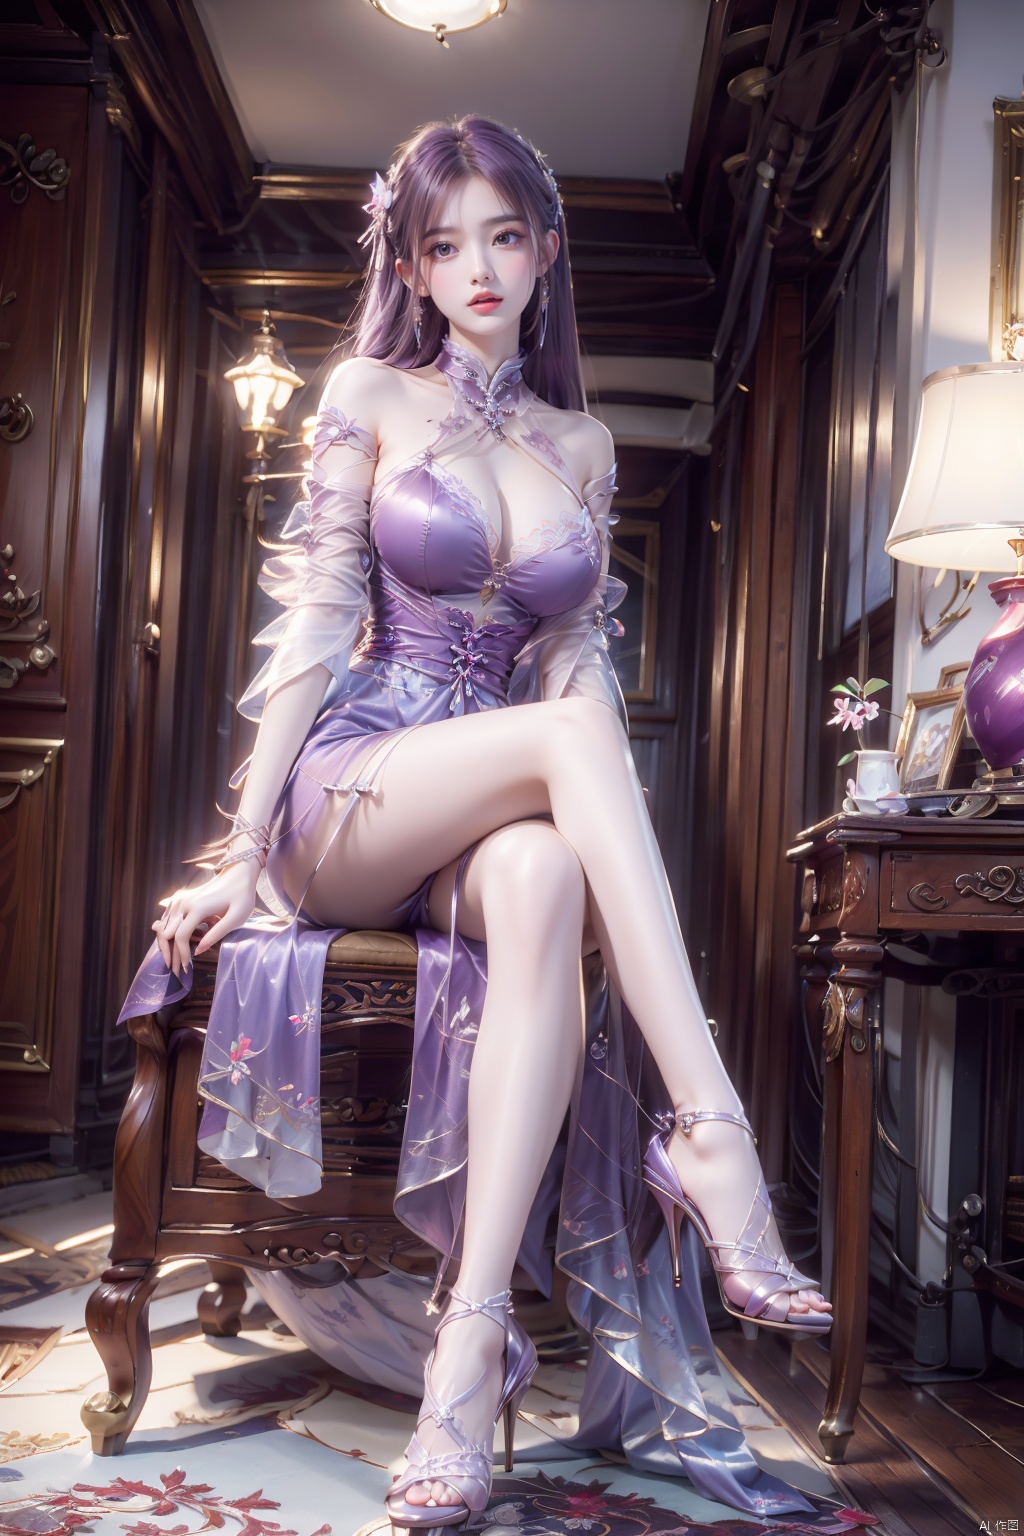 1 girl, purple hair, big breasts, sitting posture, whole body, indoors, high heels, crossed legs, white lace dress,Hair accessories, tattoo charmer